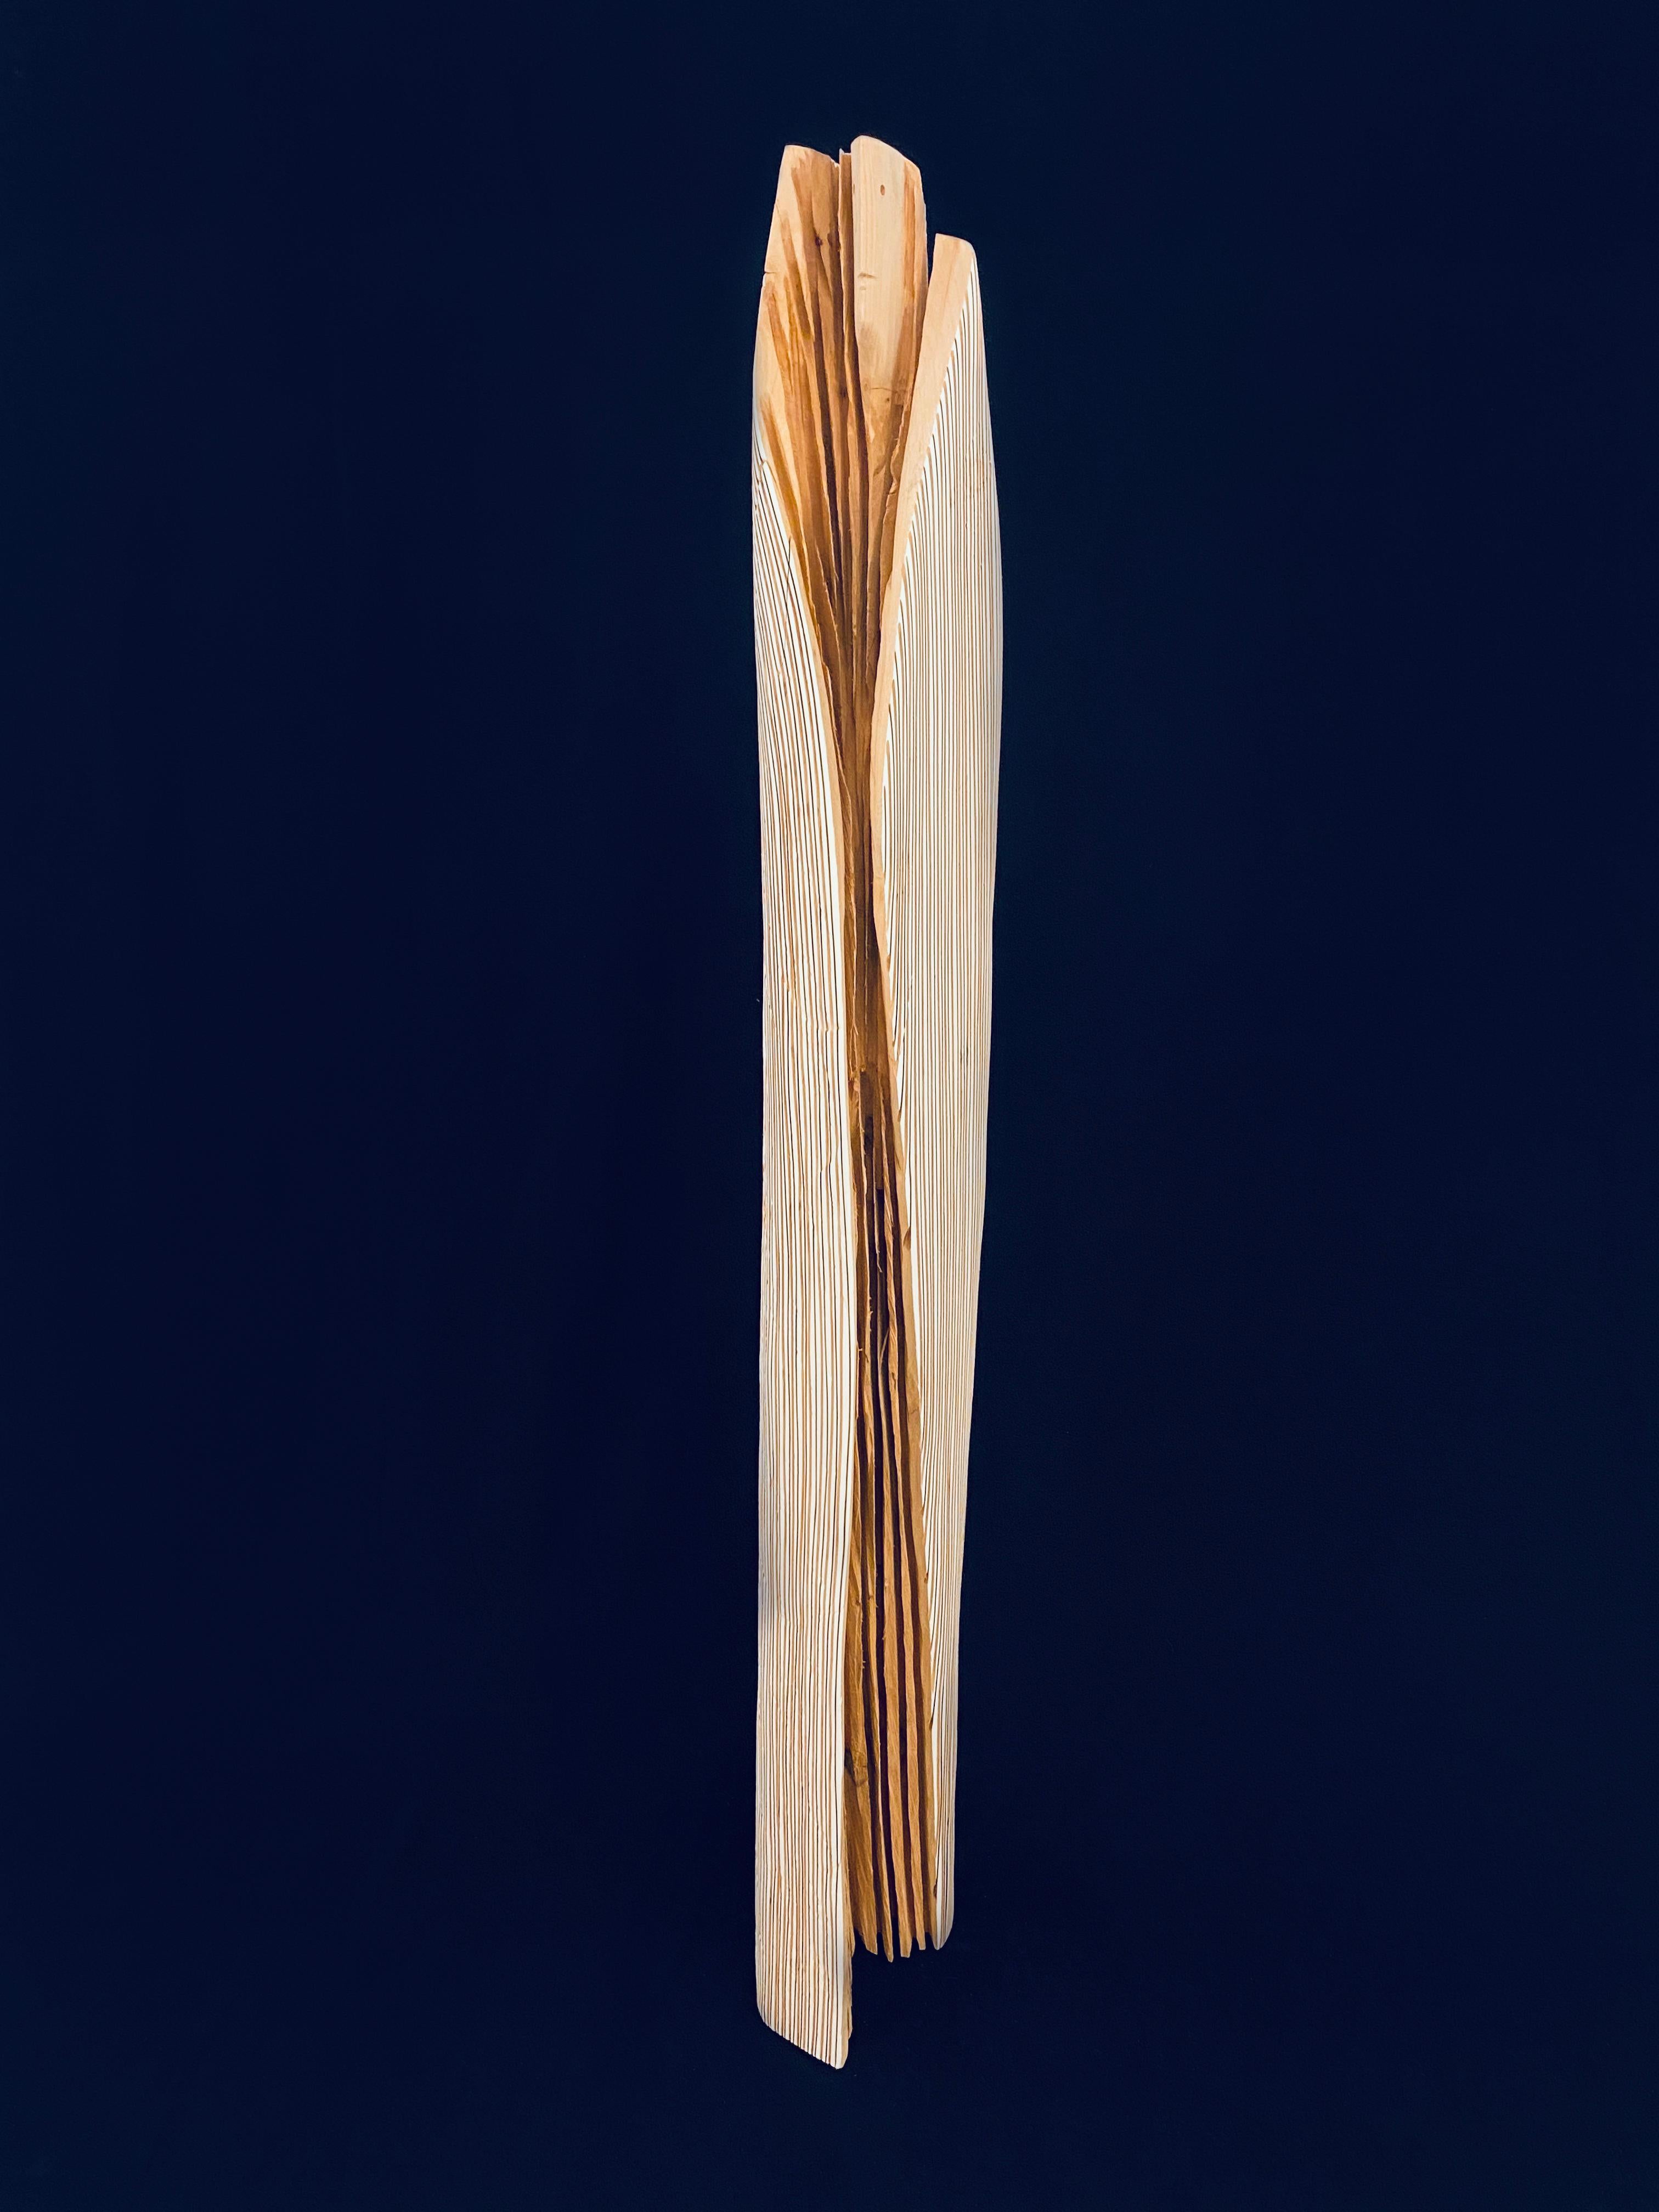 This a contemporary work by Portuguese sculptor Paulo Neves (2020), a piece made of cedar wood, carved and painted in white and brown. This work was designed to be displayed both in groups - with a set of similar sculptures (see images for example)